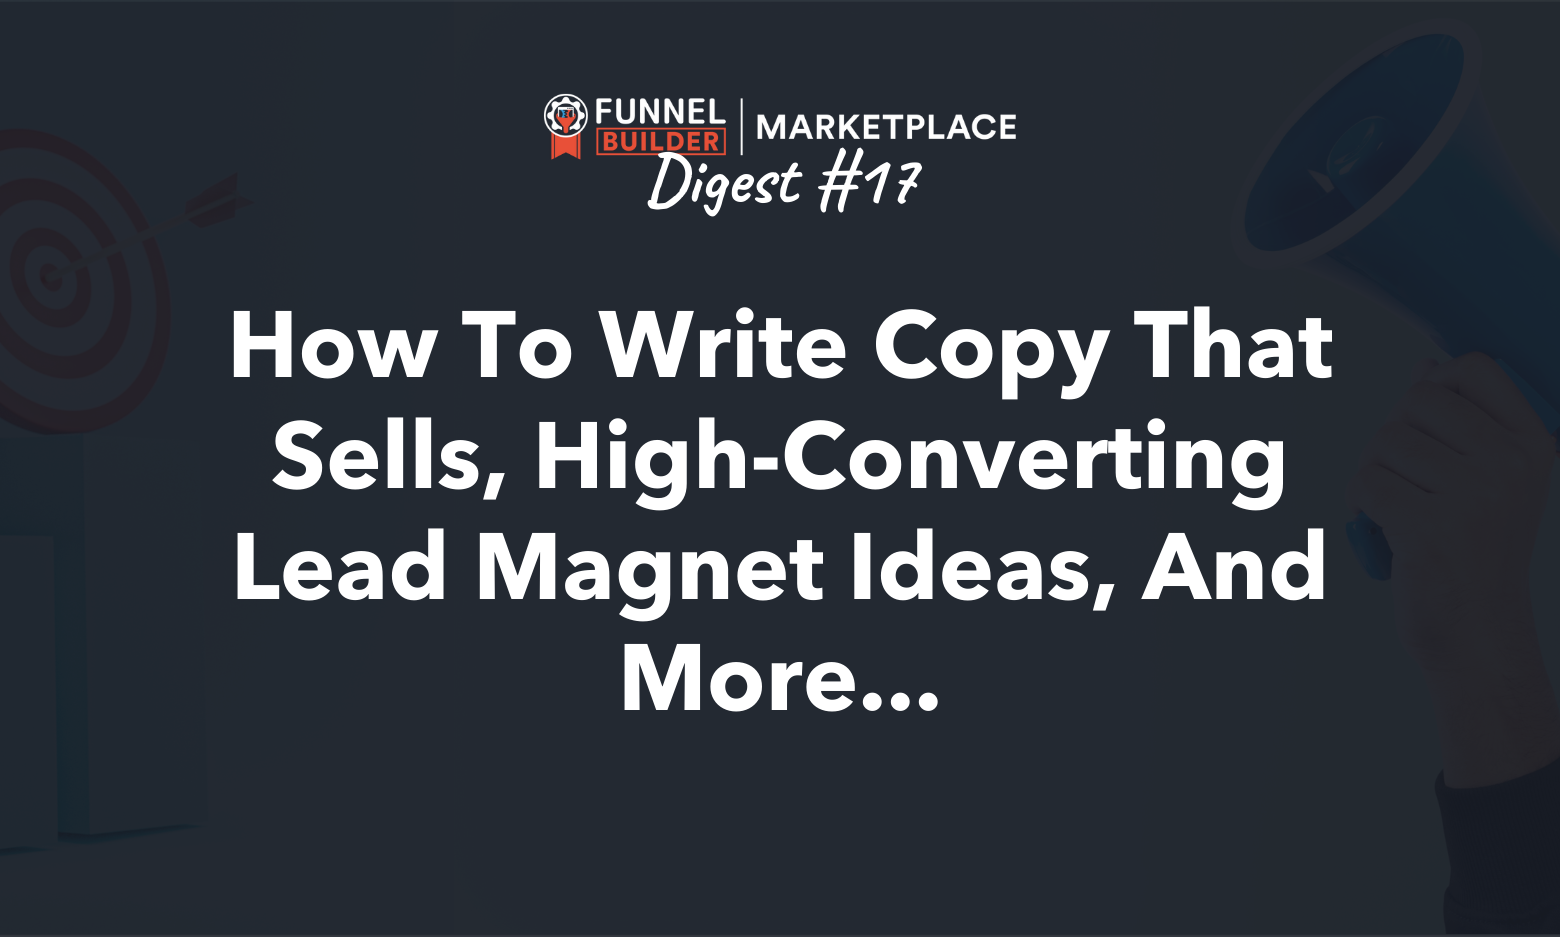 Rolodex Digest #17: How to write copy that sells, high-converting lead magnet ideas, and more